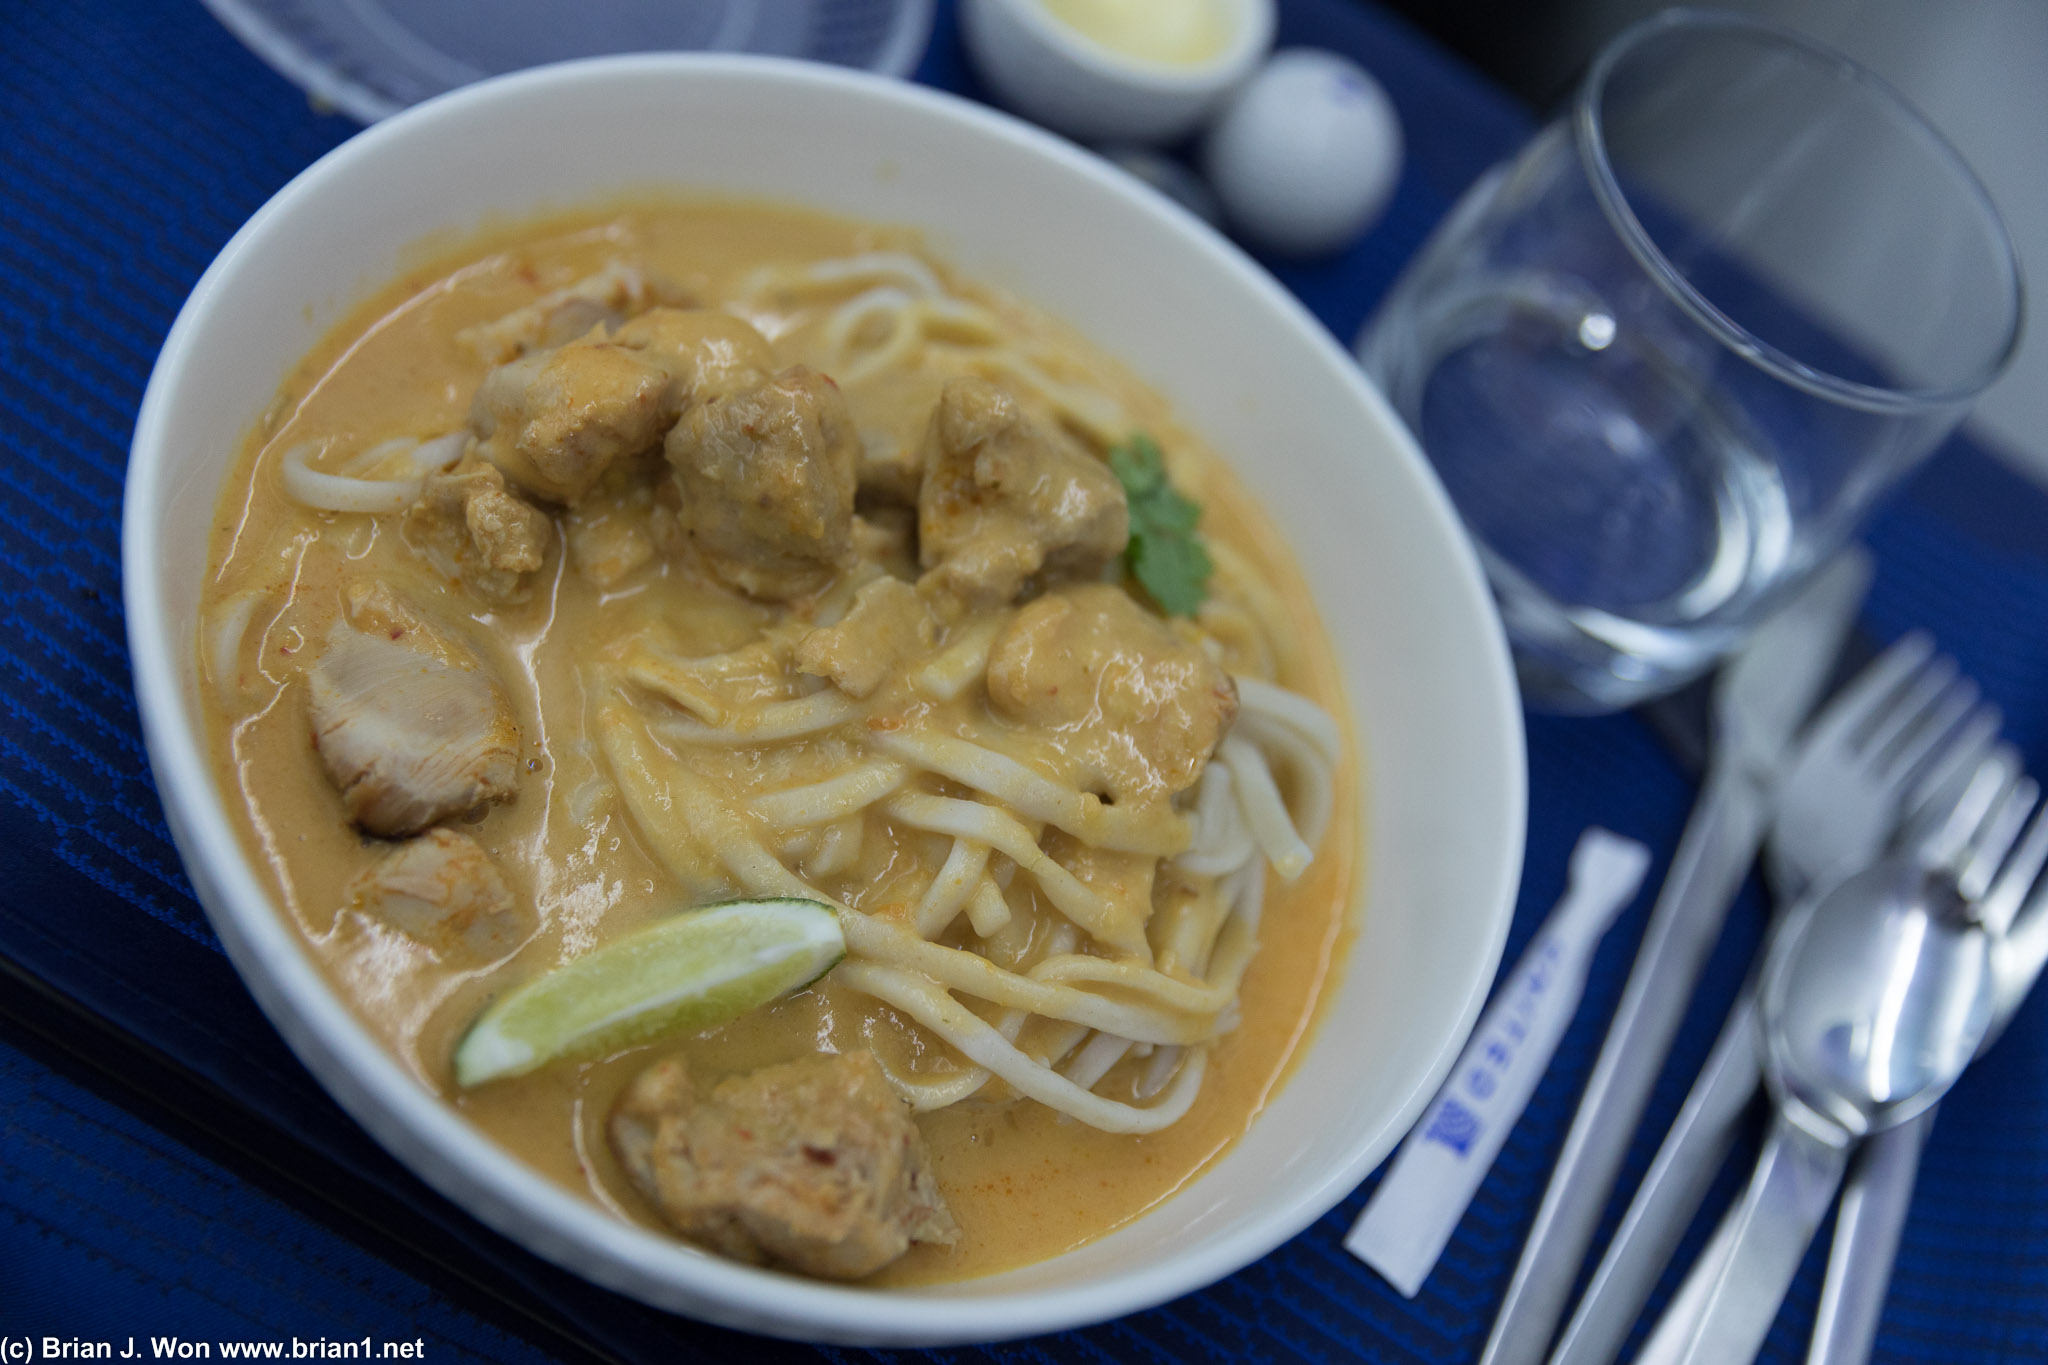 Thai-style curry chicken noodle. Probably the most edible lunch option.